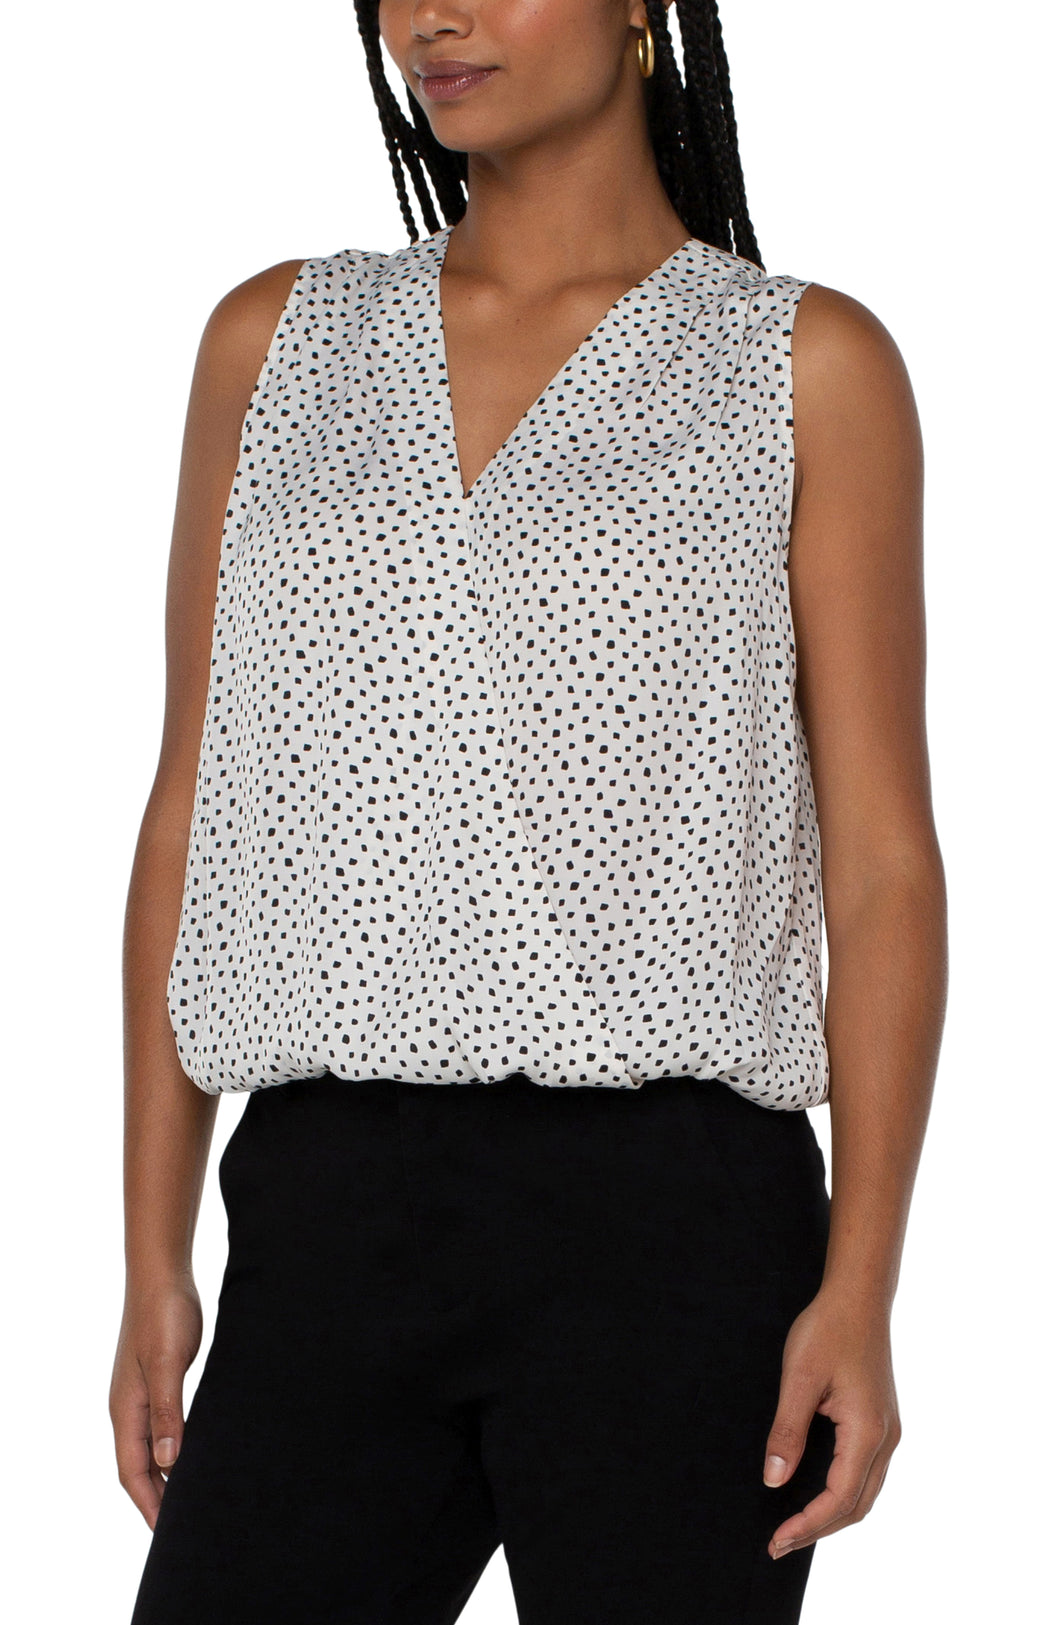 This classic dot printed top features a draped front for the most flattering fit.  The V-neck design elevates the look of this lovely sleeveless top.  A perfect top to match with so many different bottoms from jeans to dress pants.  Create the perfect outfit when paired with our Black Sena Boyfriend Blazer with Princess Seams by Liverpool LA and our Black Kelsey Knit Trouser by Liverpool LA.